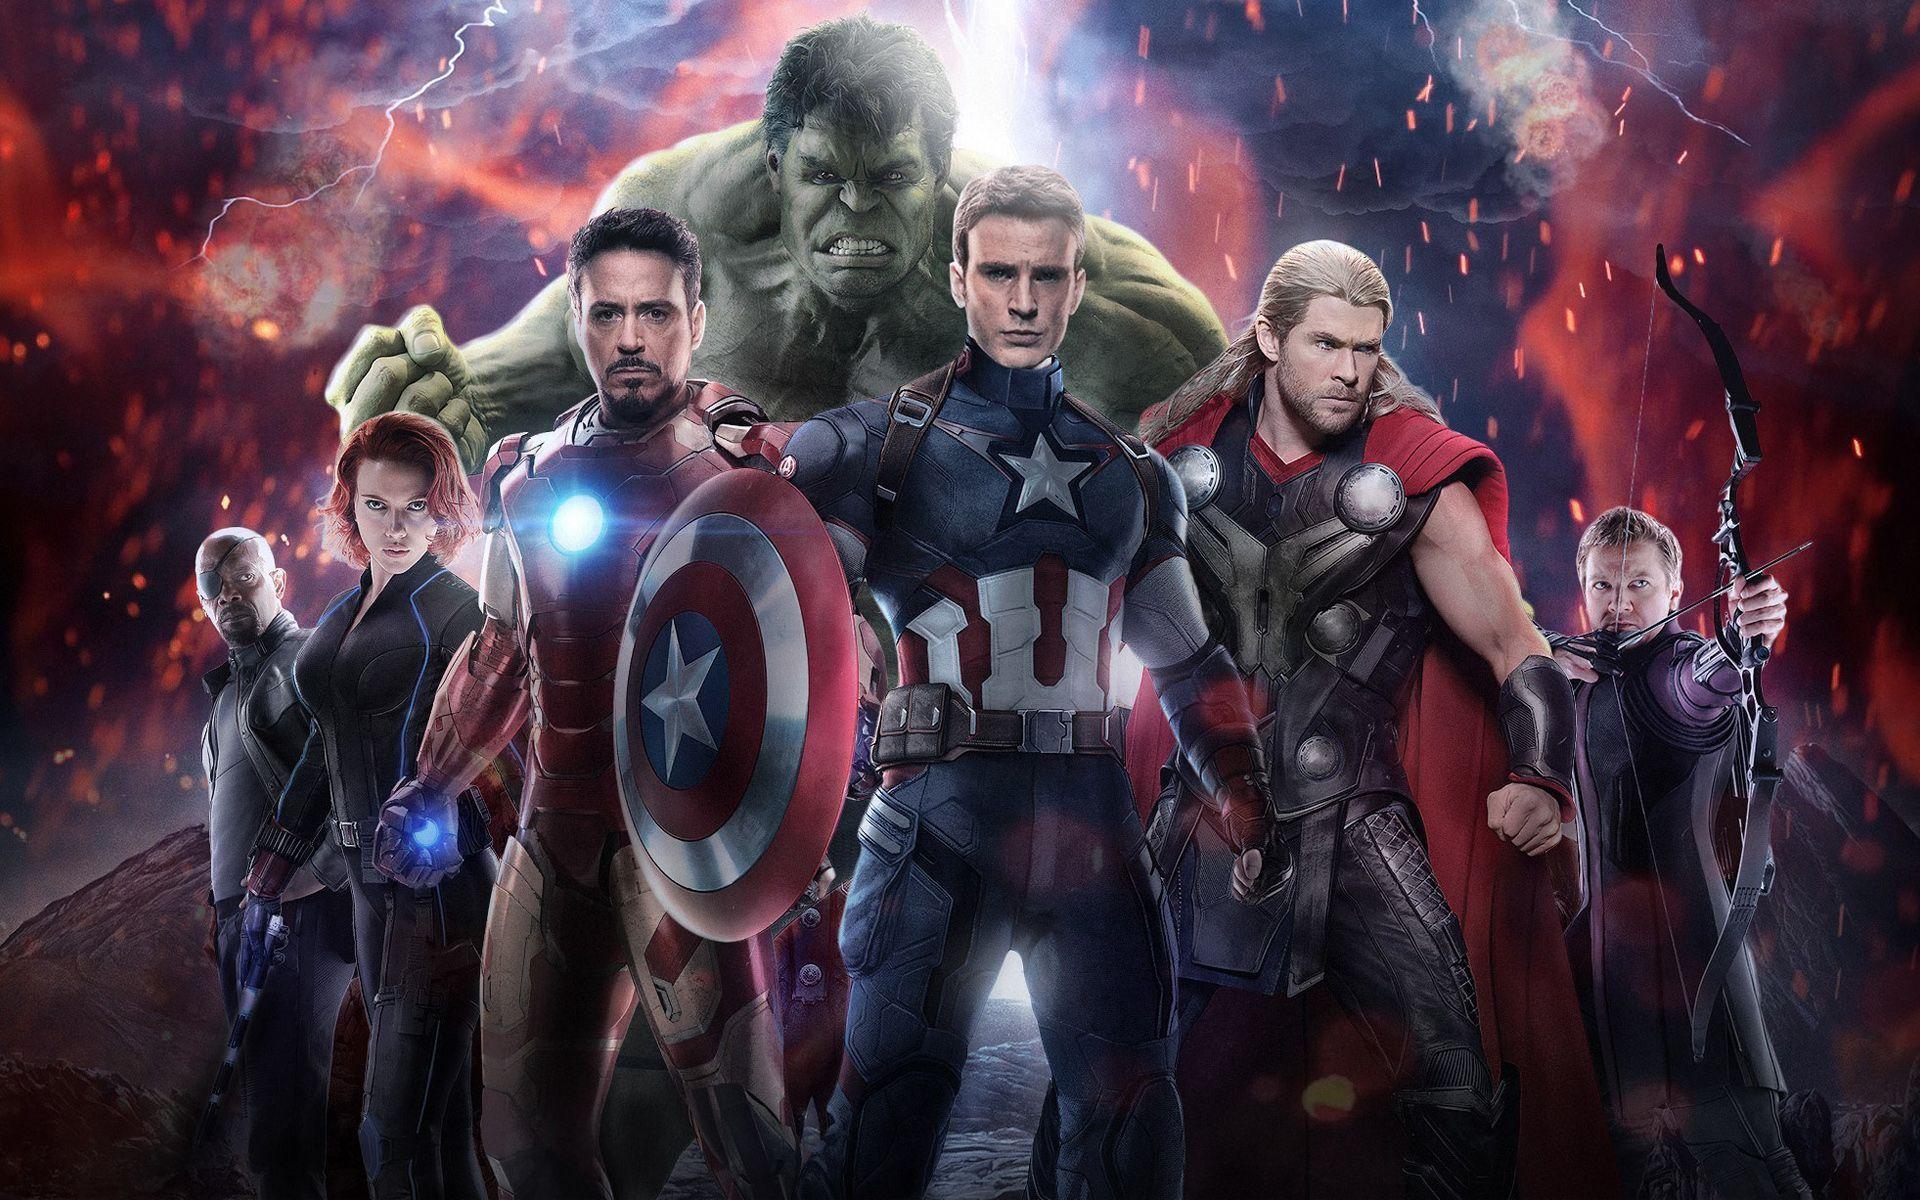 Avengers Age Of Ultron Wallpaper Mobile #avengers #age #of